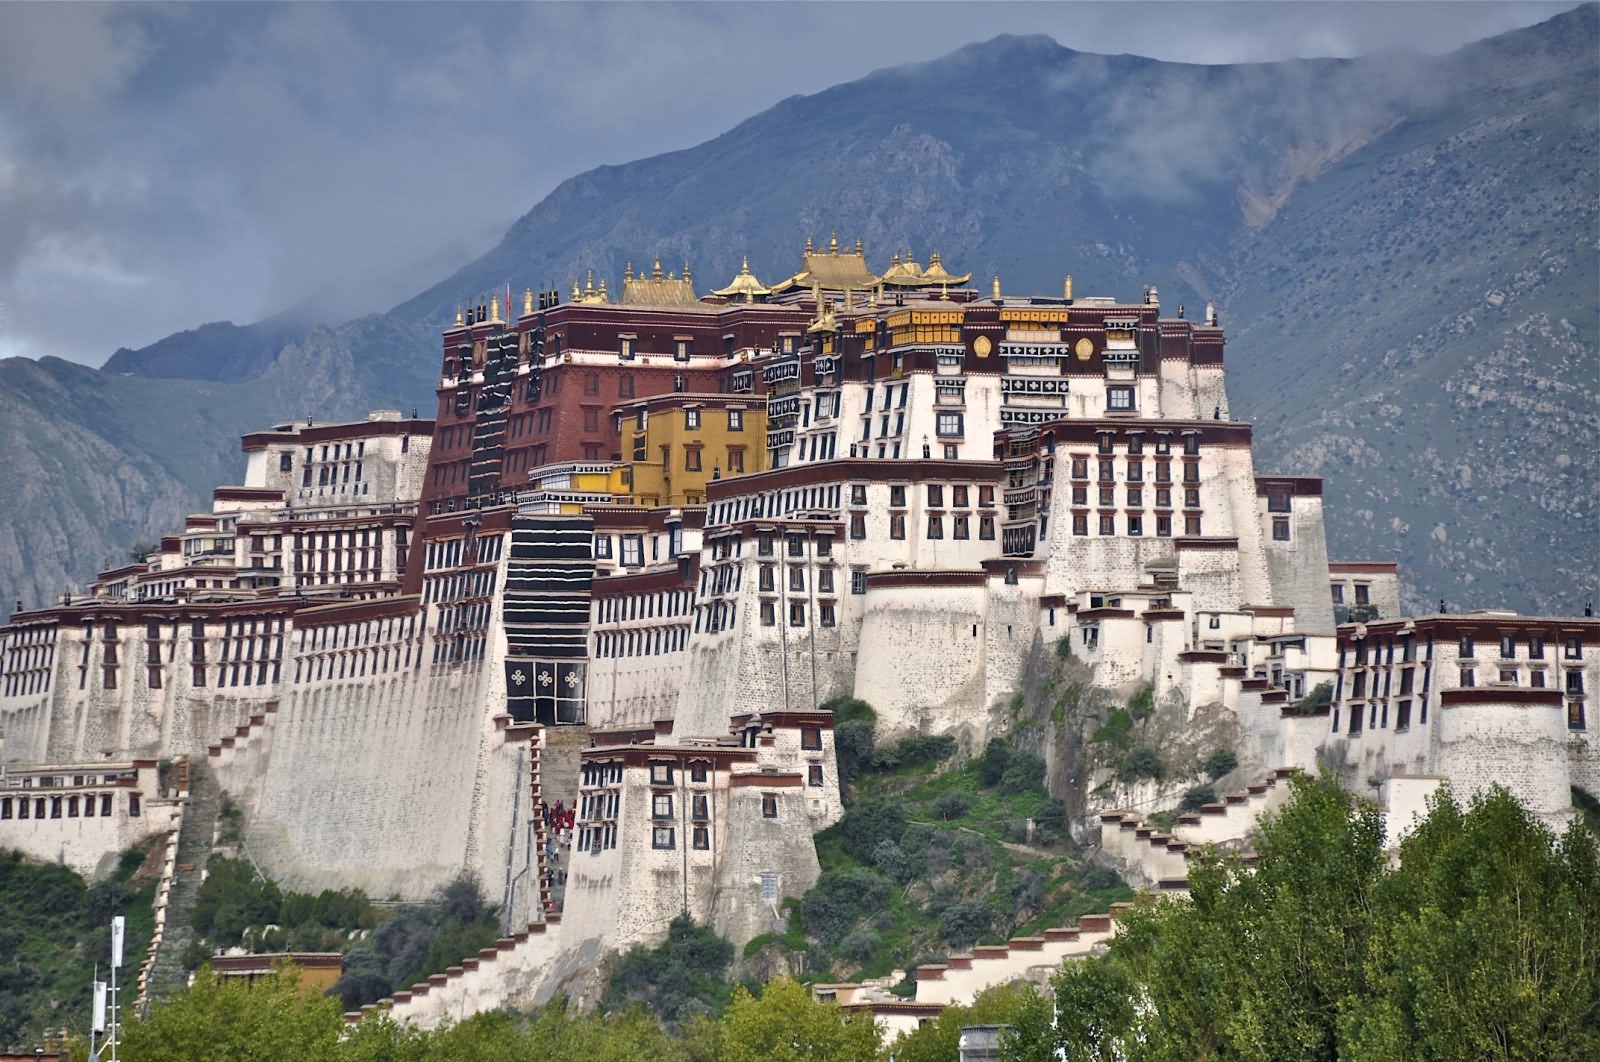 The Potala Palace In Lhasa